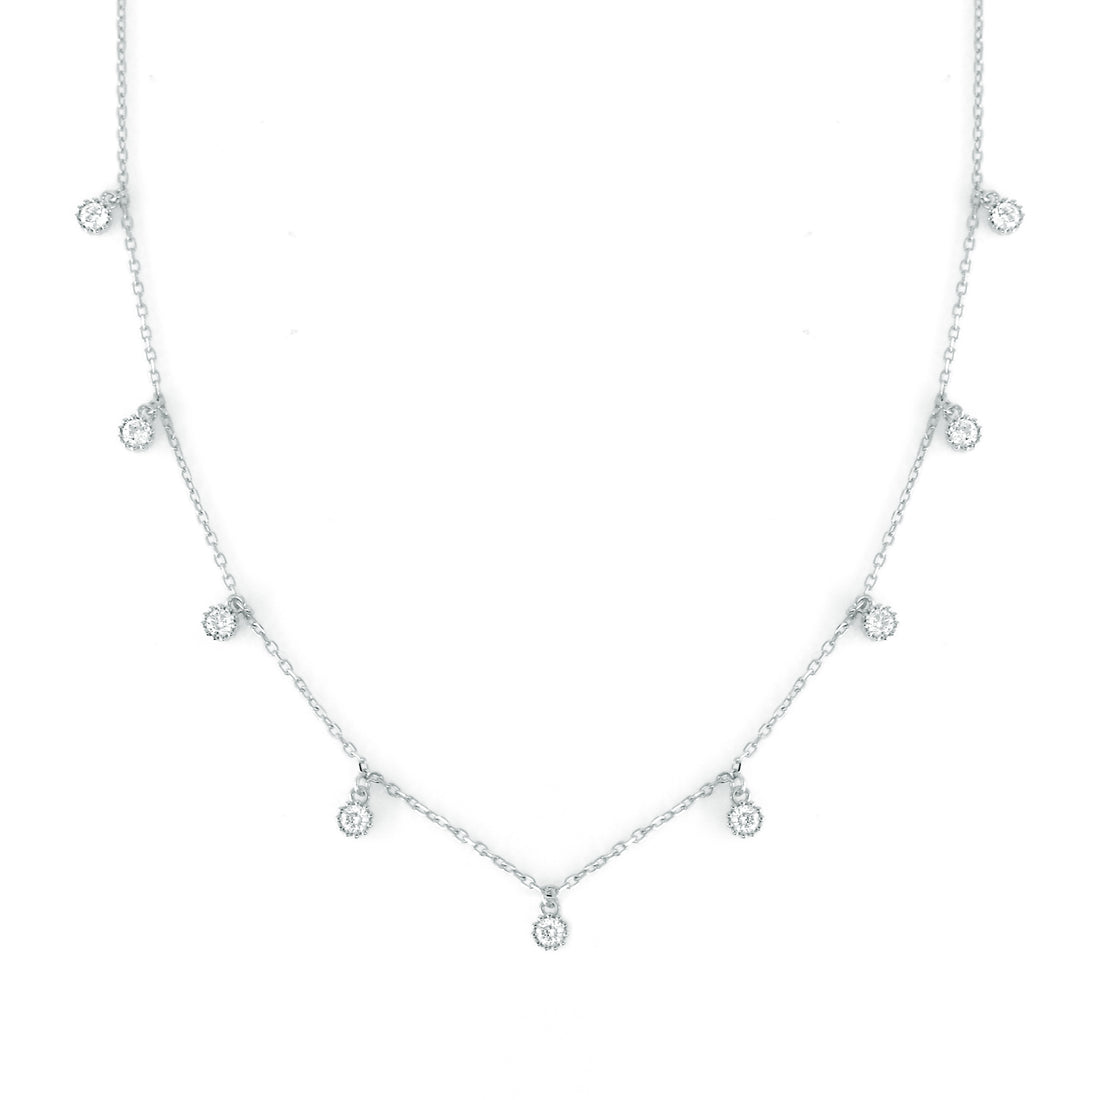 DOLCE MONDO Silver 925 Chain Charm Necklace with Sparkling Zircons